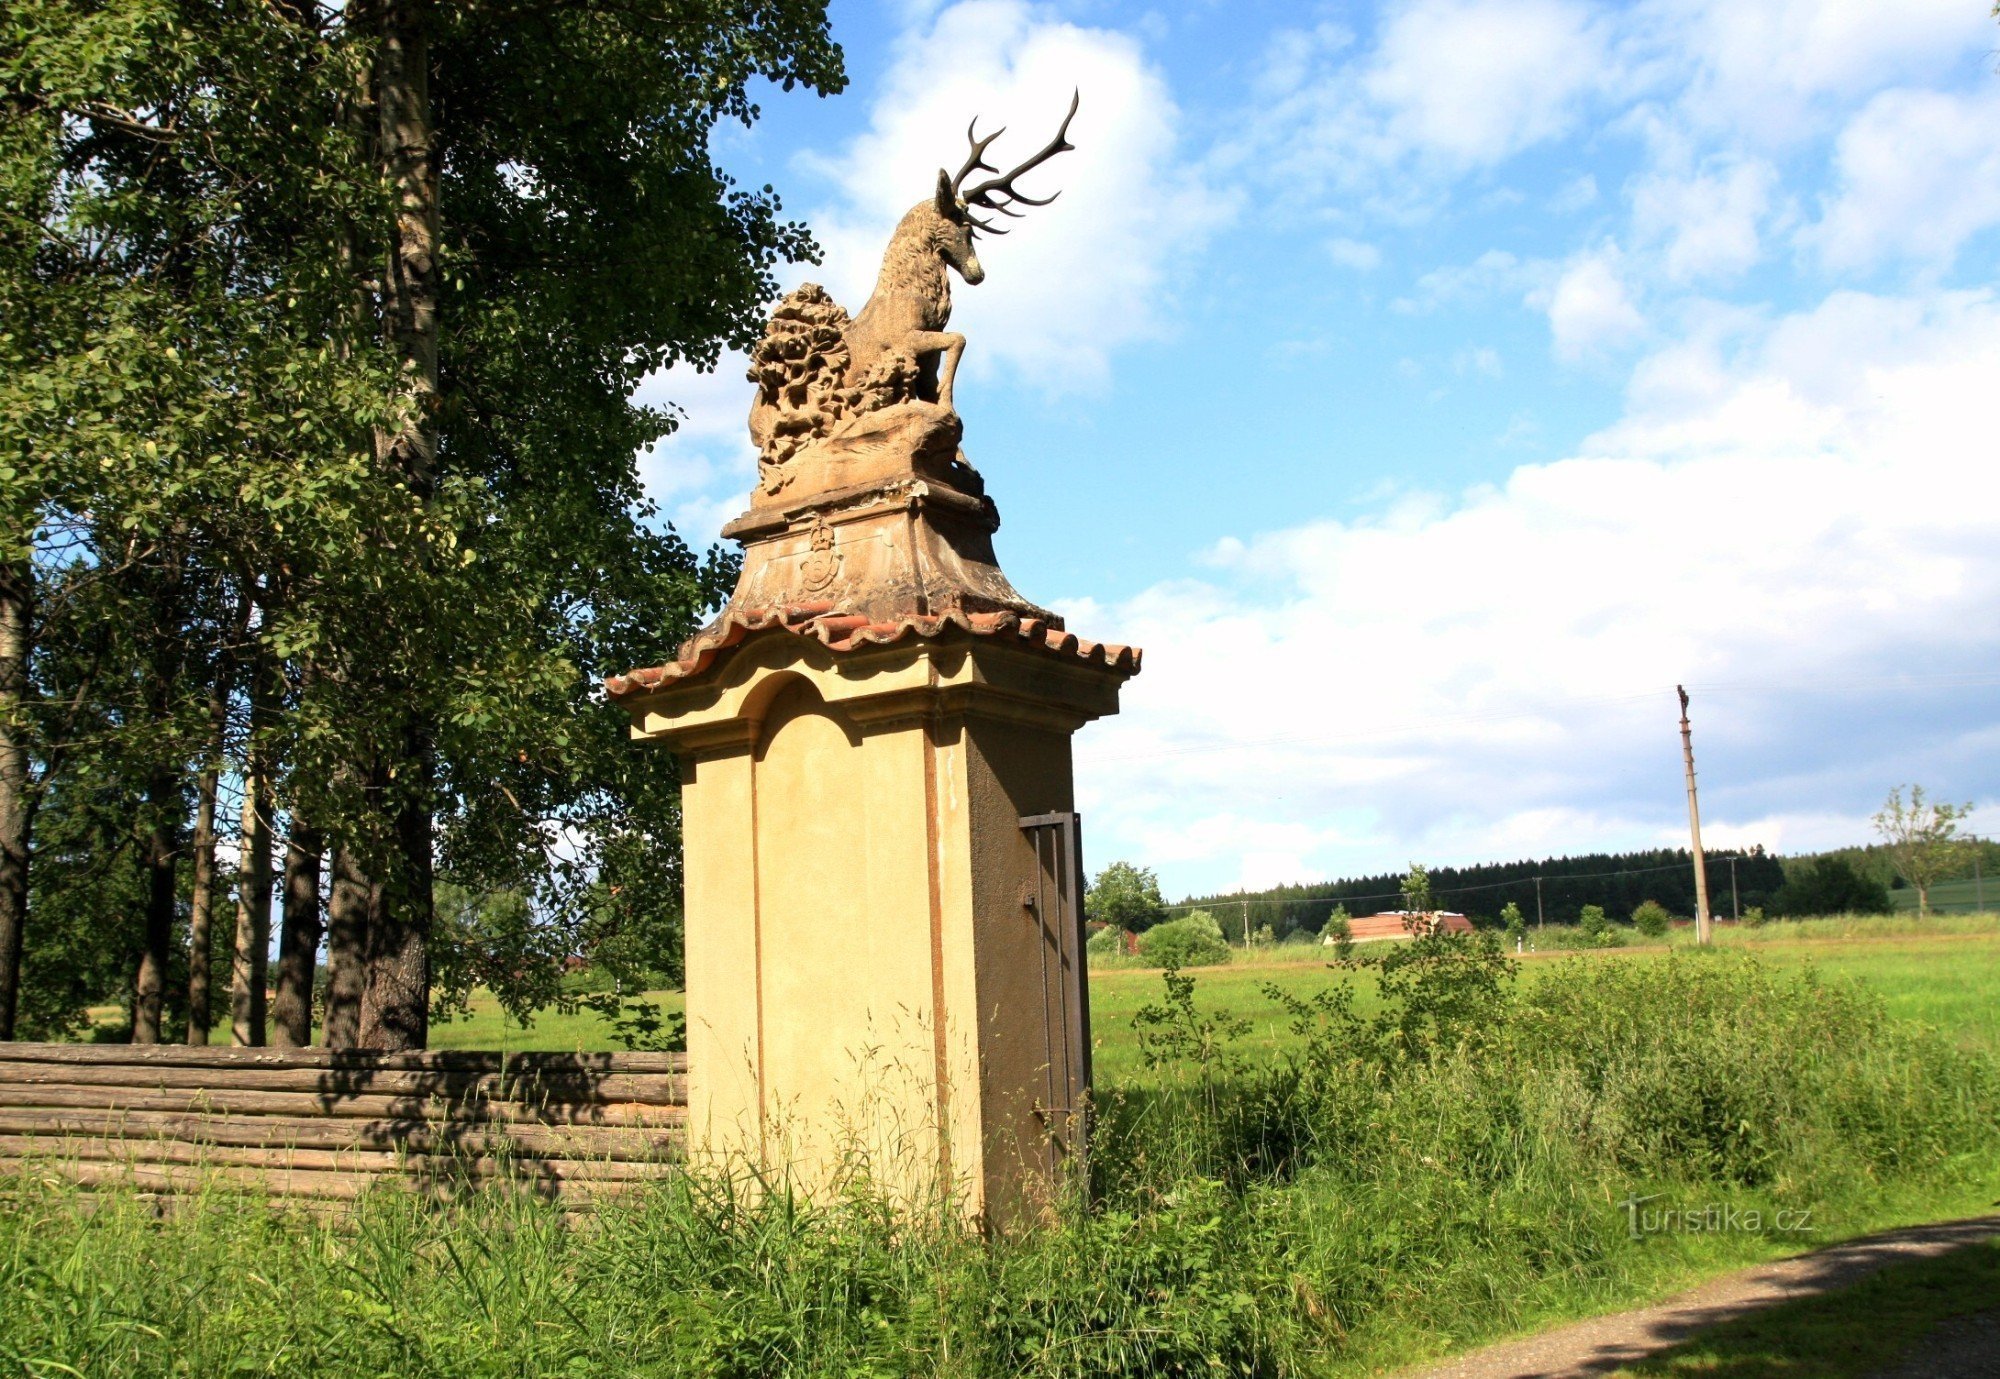 Deer statue in the entrance gate